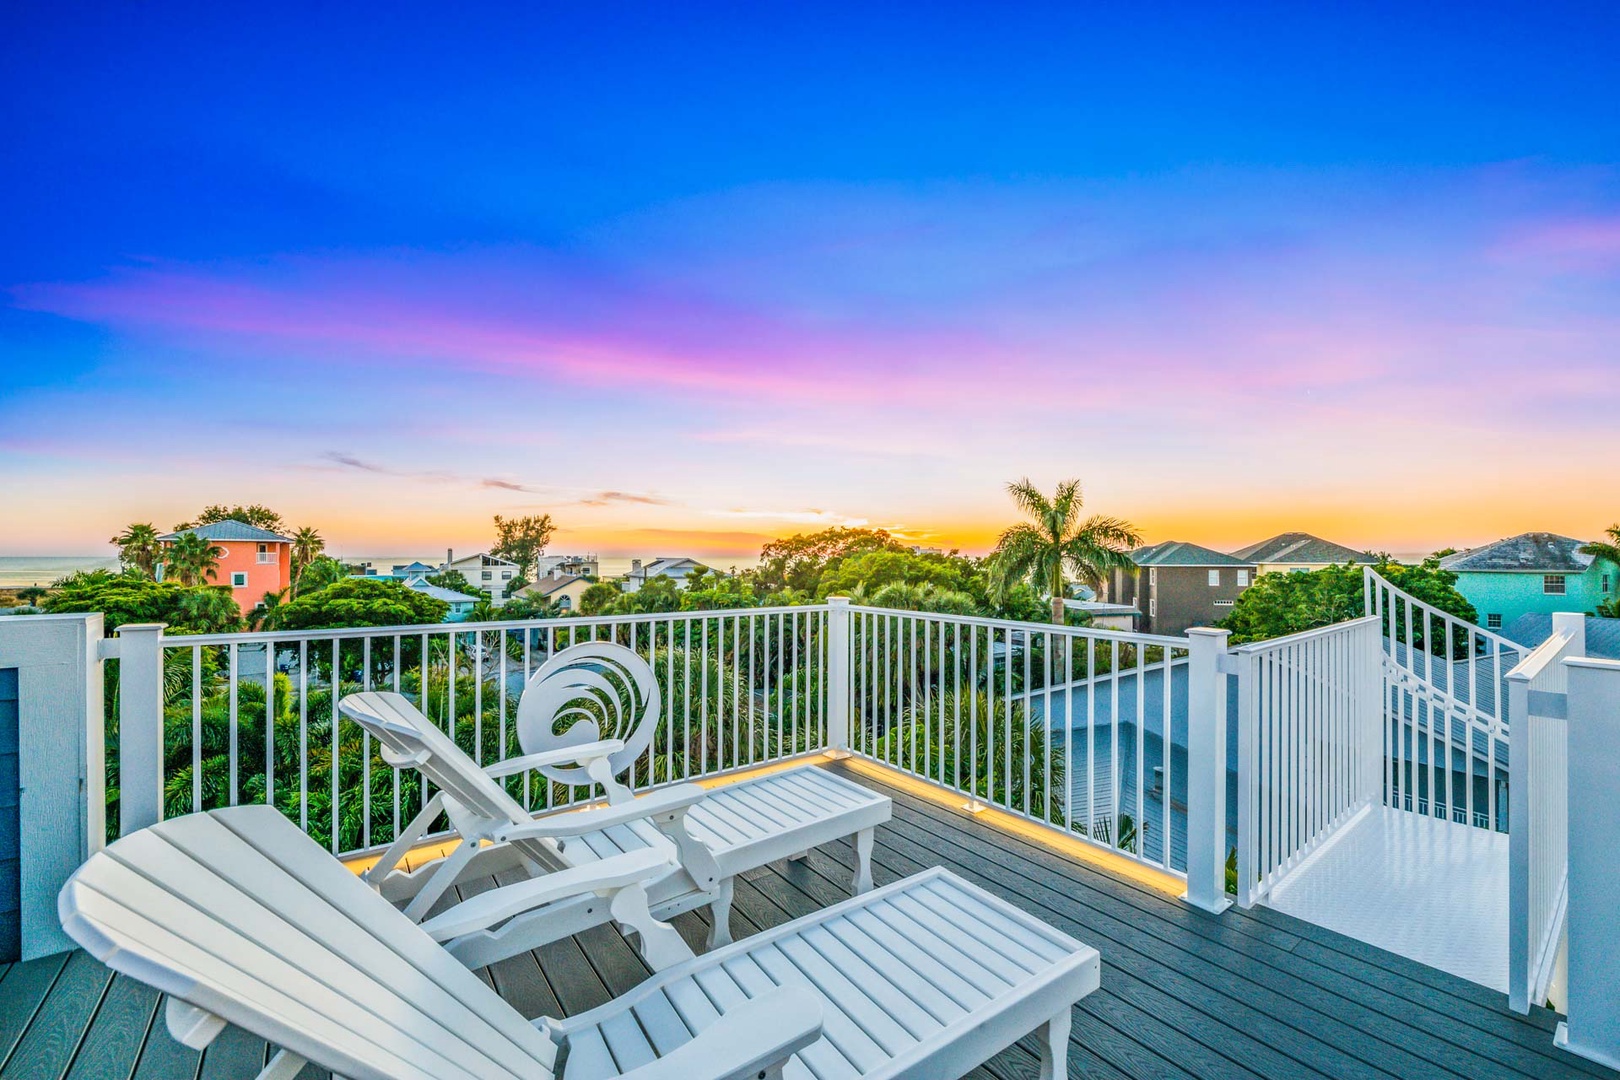 Enjoy this Breathtaking Sunset from the Roof Top Deck